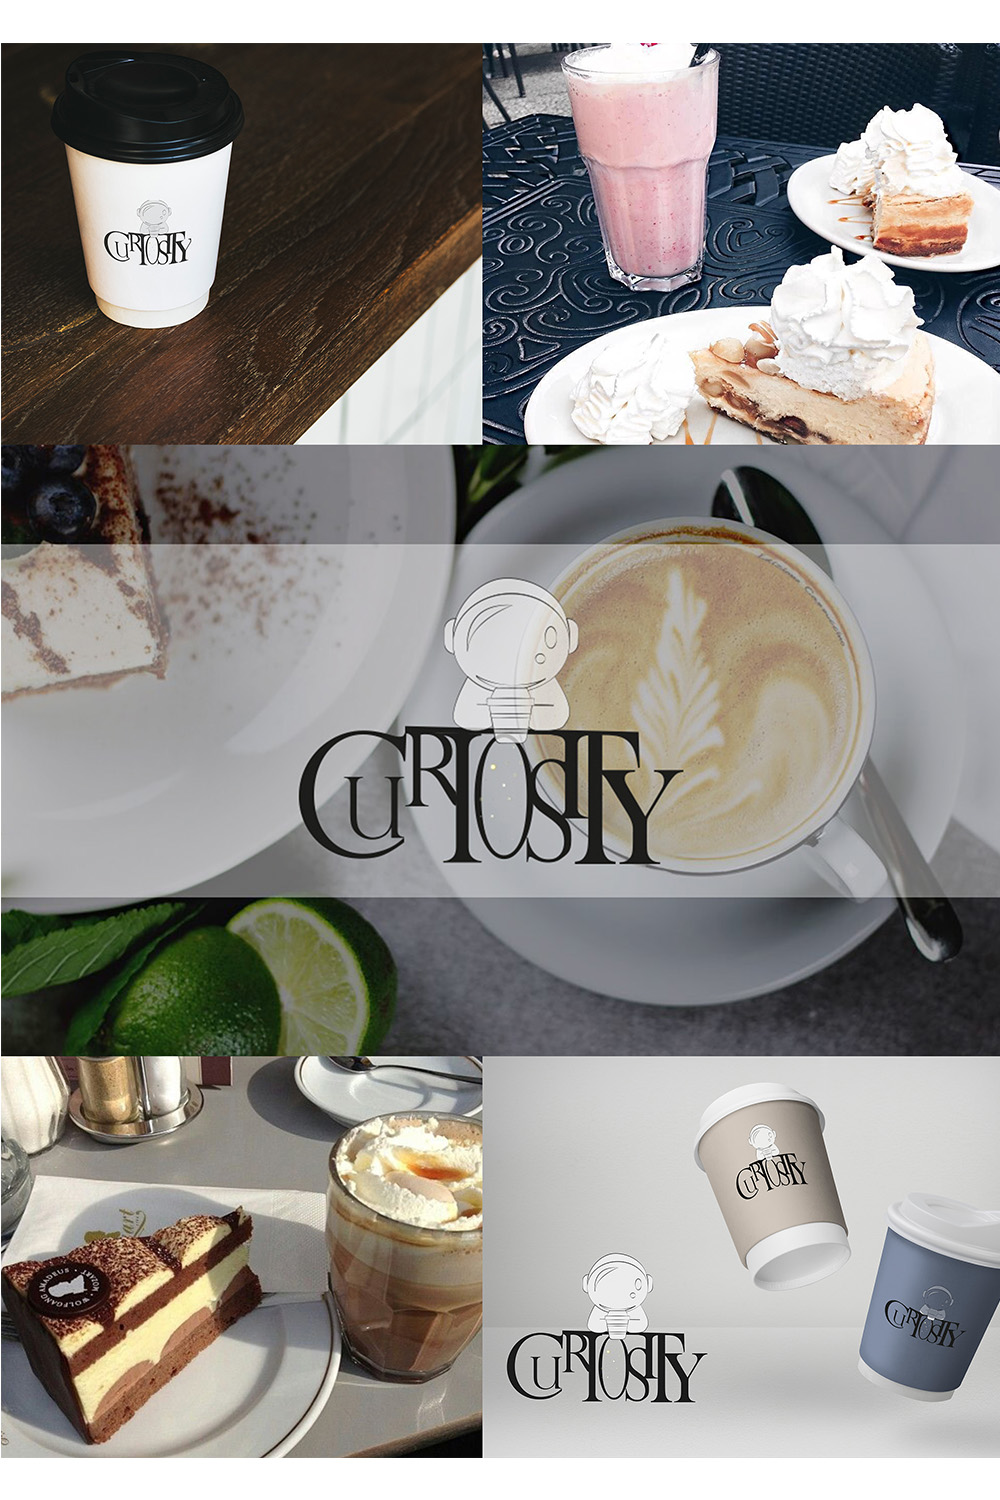 Space coffee curiosity vector logo gray pinterest preview image.